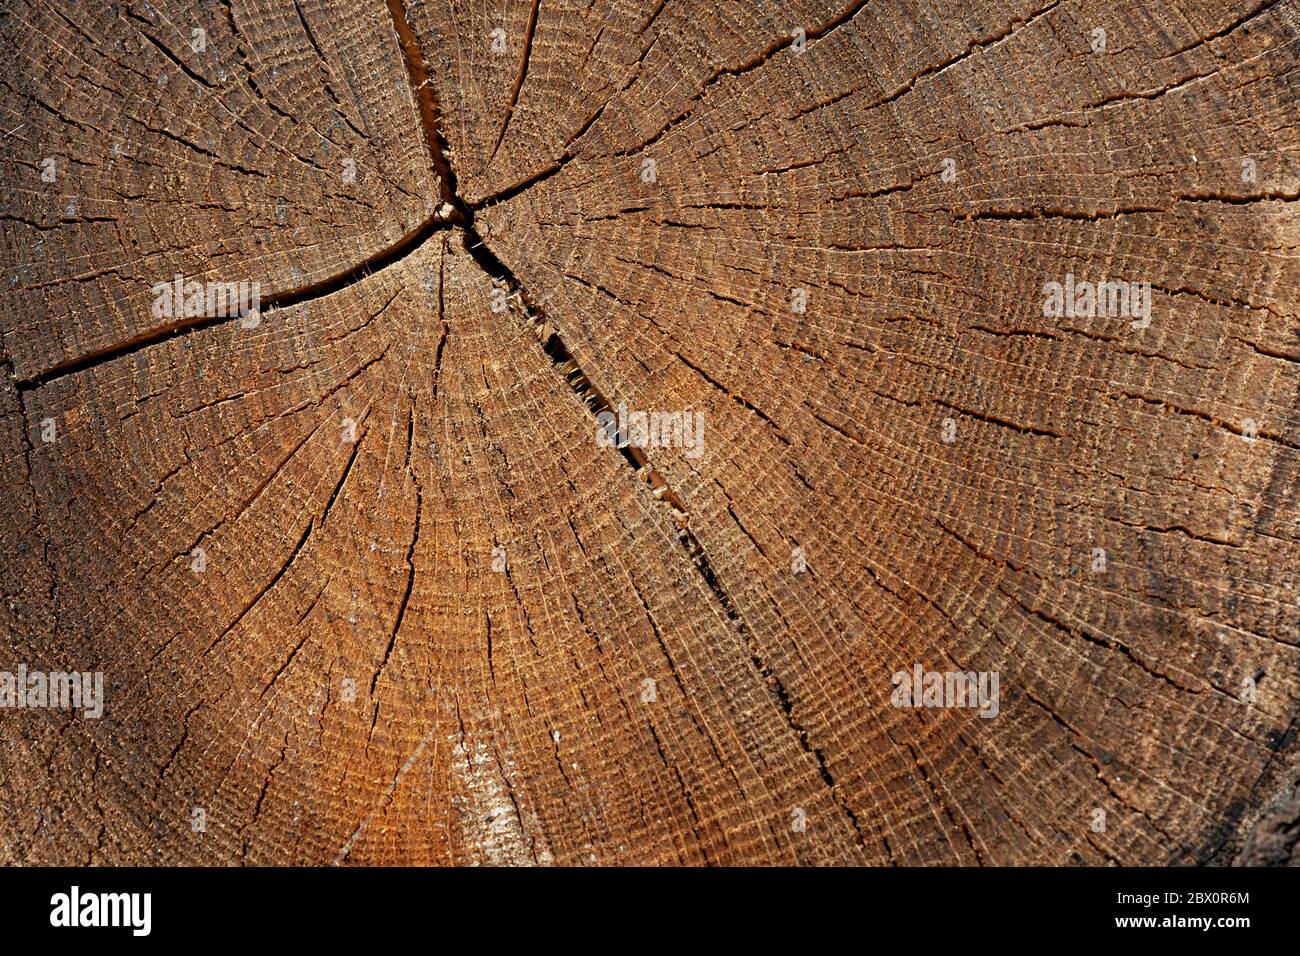 Old wooden tree cut surface. Detailed tones of a felled tree trunk or stump. Rough organic texture of tree rings with close up of end grain. Stock Photo